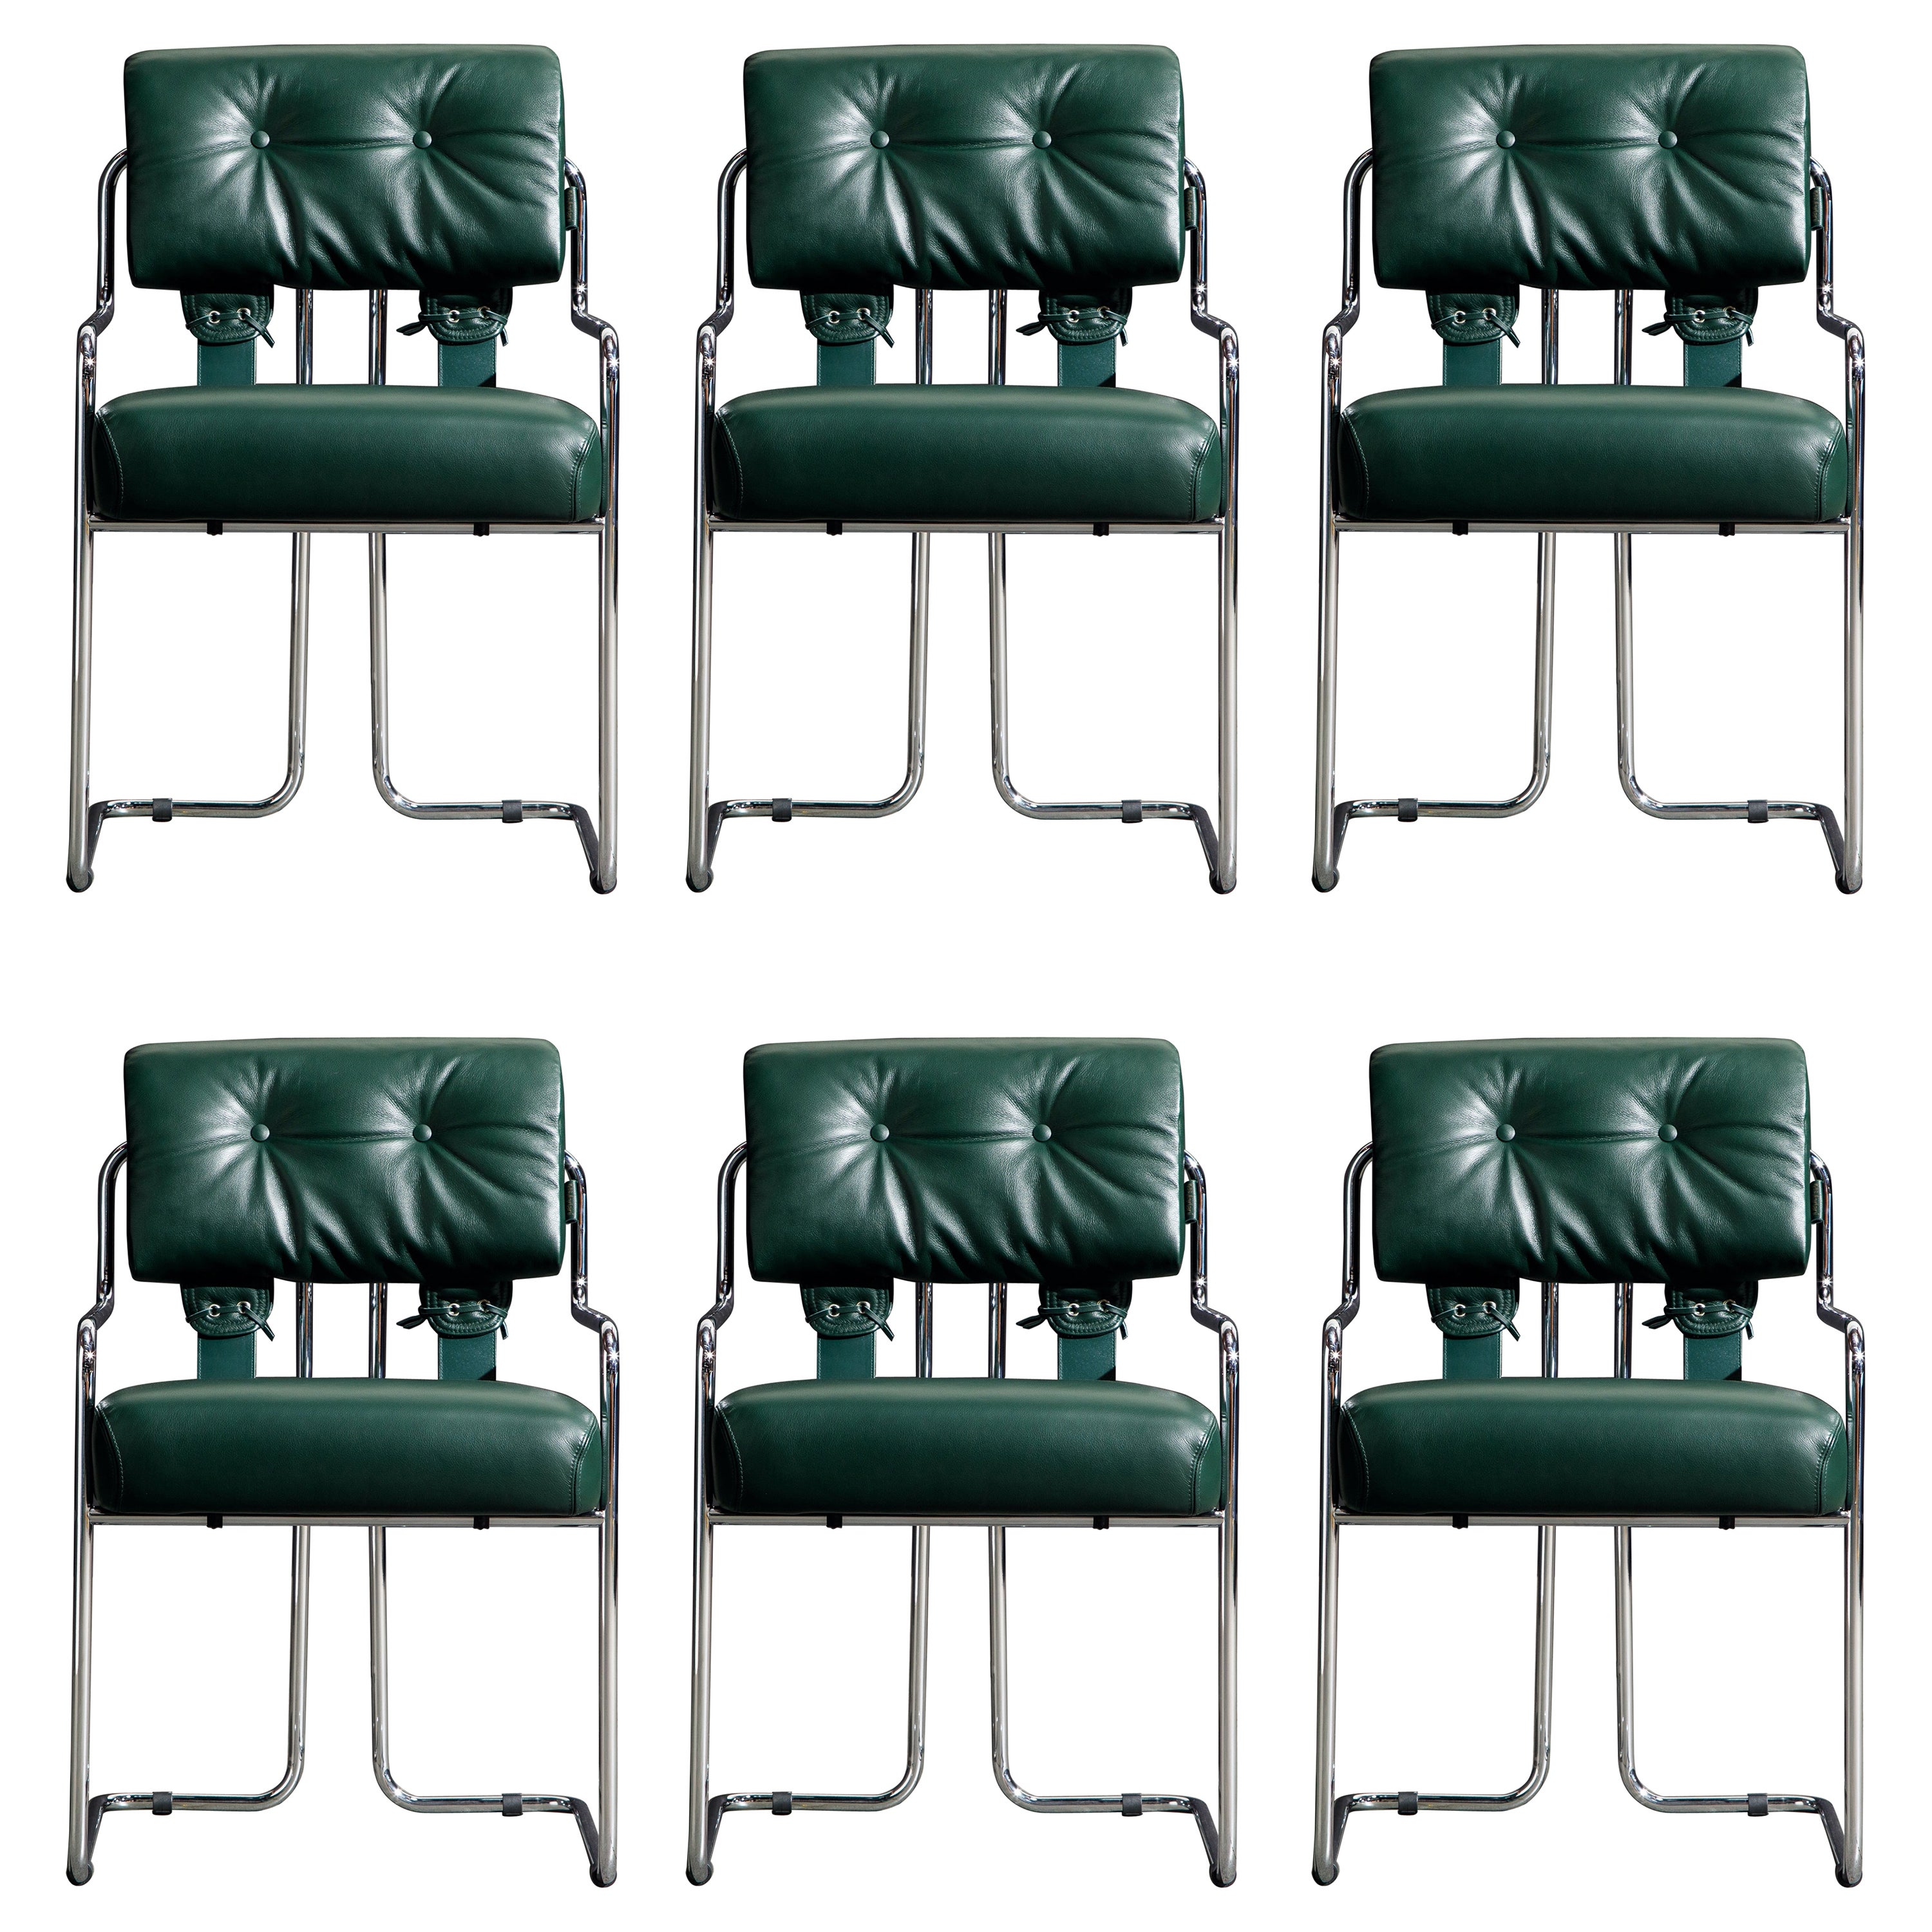 Brand New Emerald Green Leather Tucroma Chairs by Guido Faleschini for Mariani For Sale